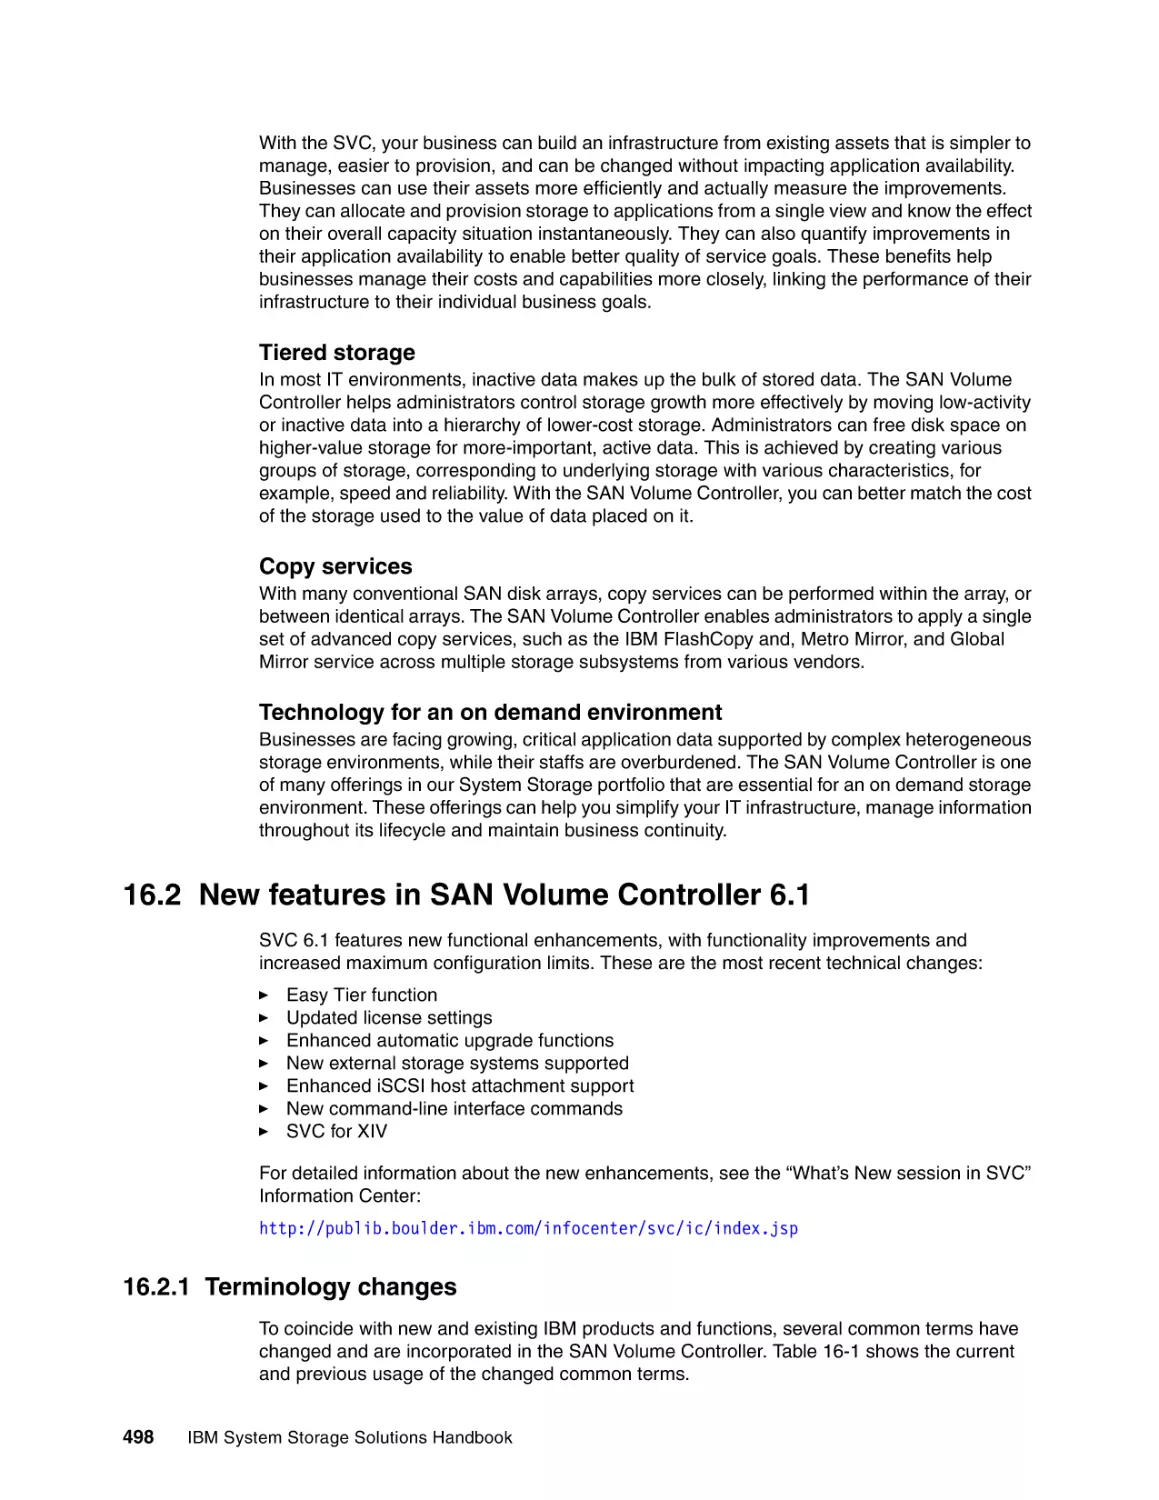 16.2 New features in SAN Volume Controller 6.1
16.2.1 Terminology changes